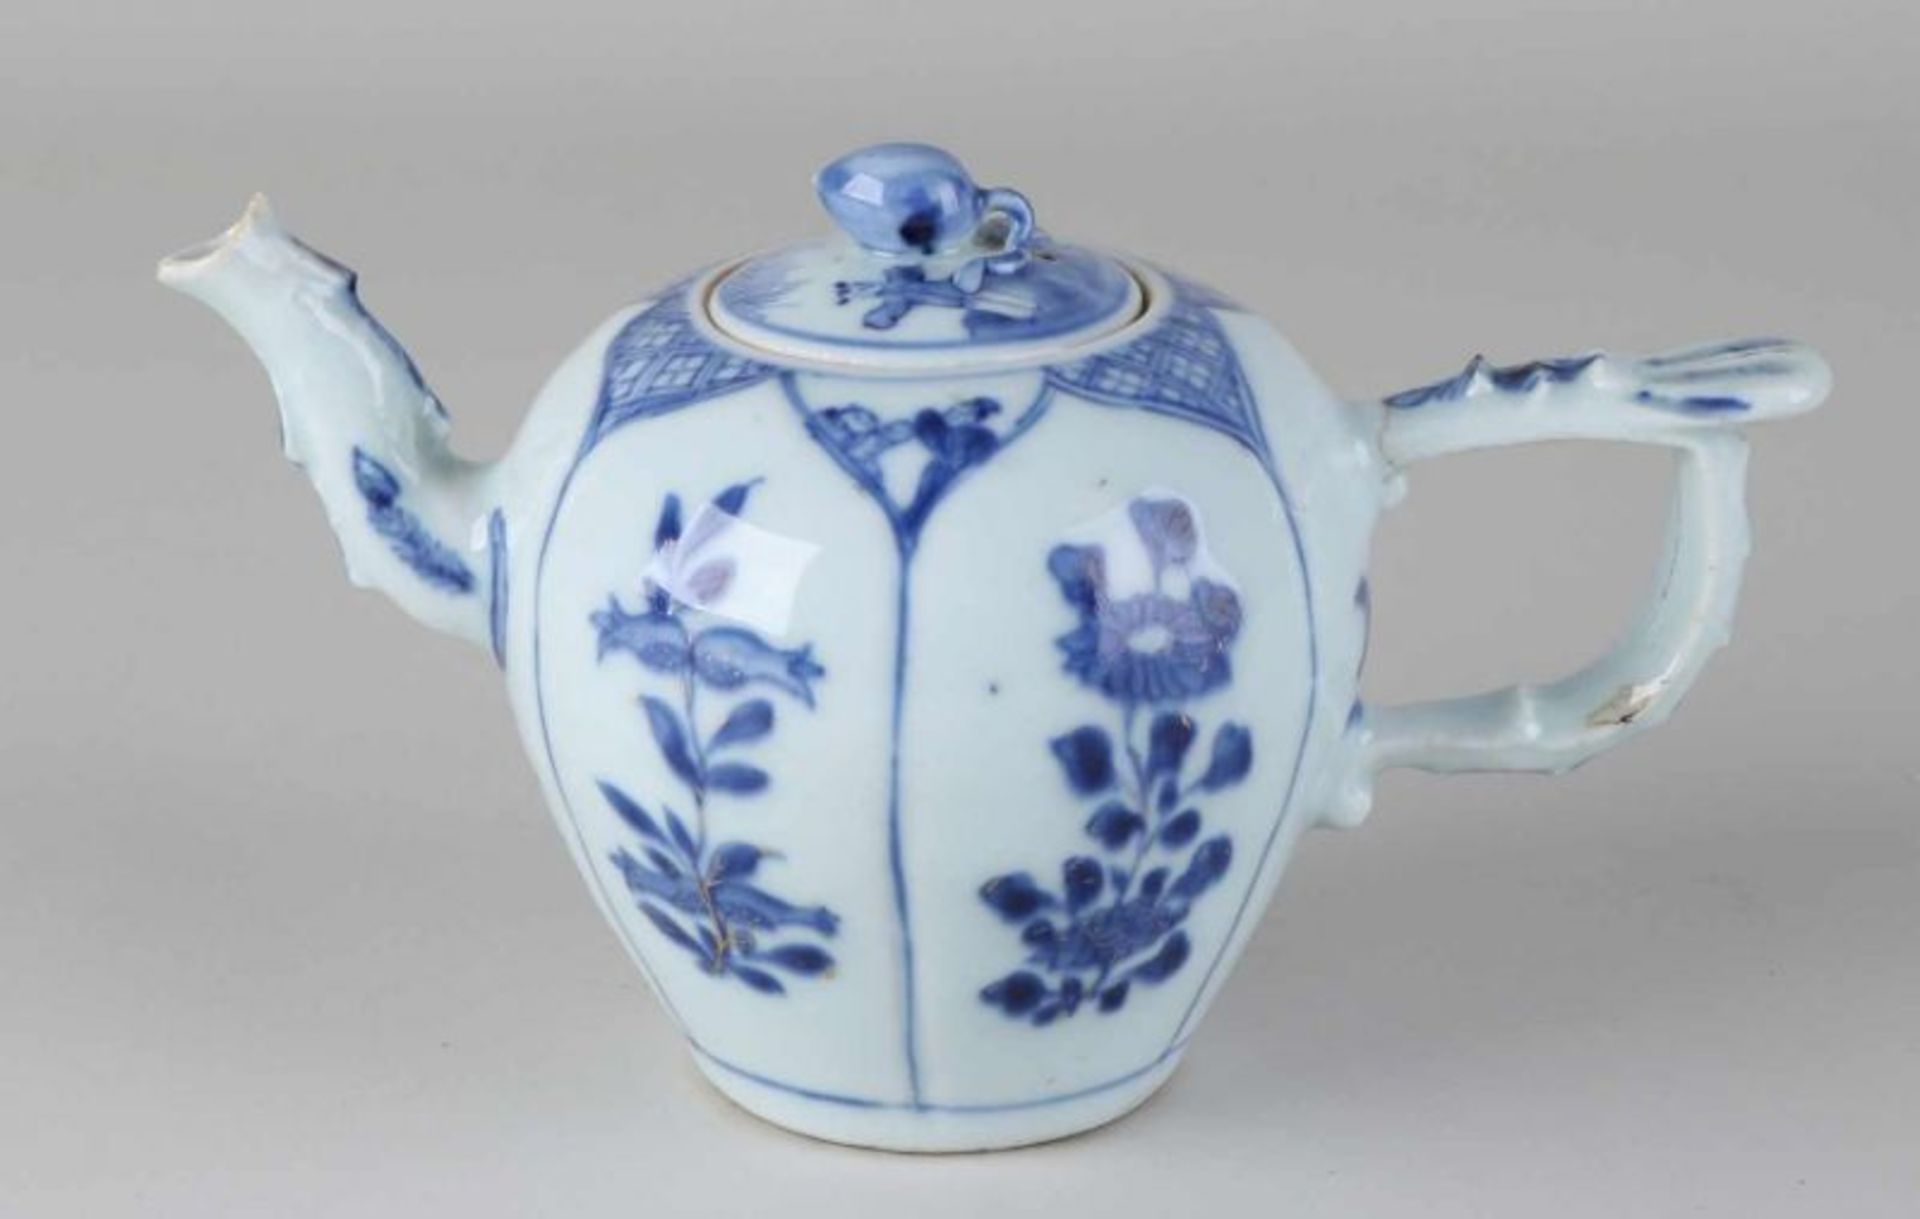 Rare 17th century Chinese Kang Xi porcelain teapot with zots on lid and floral decor. Hairline